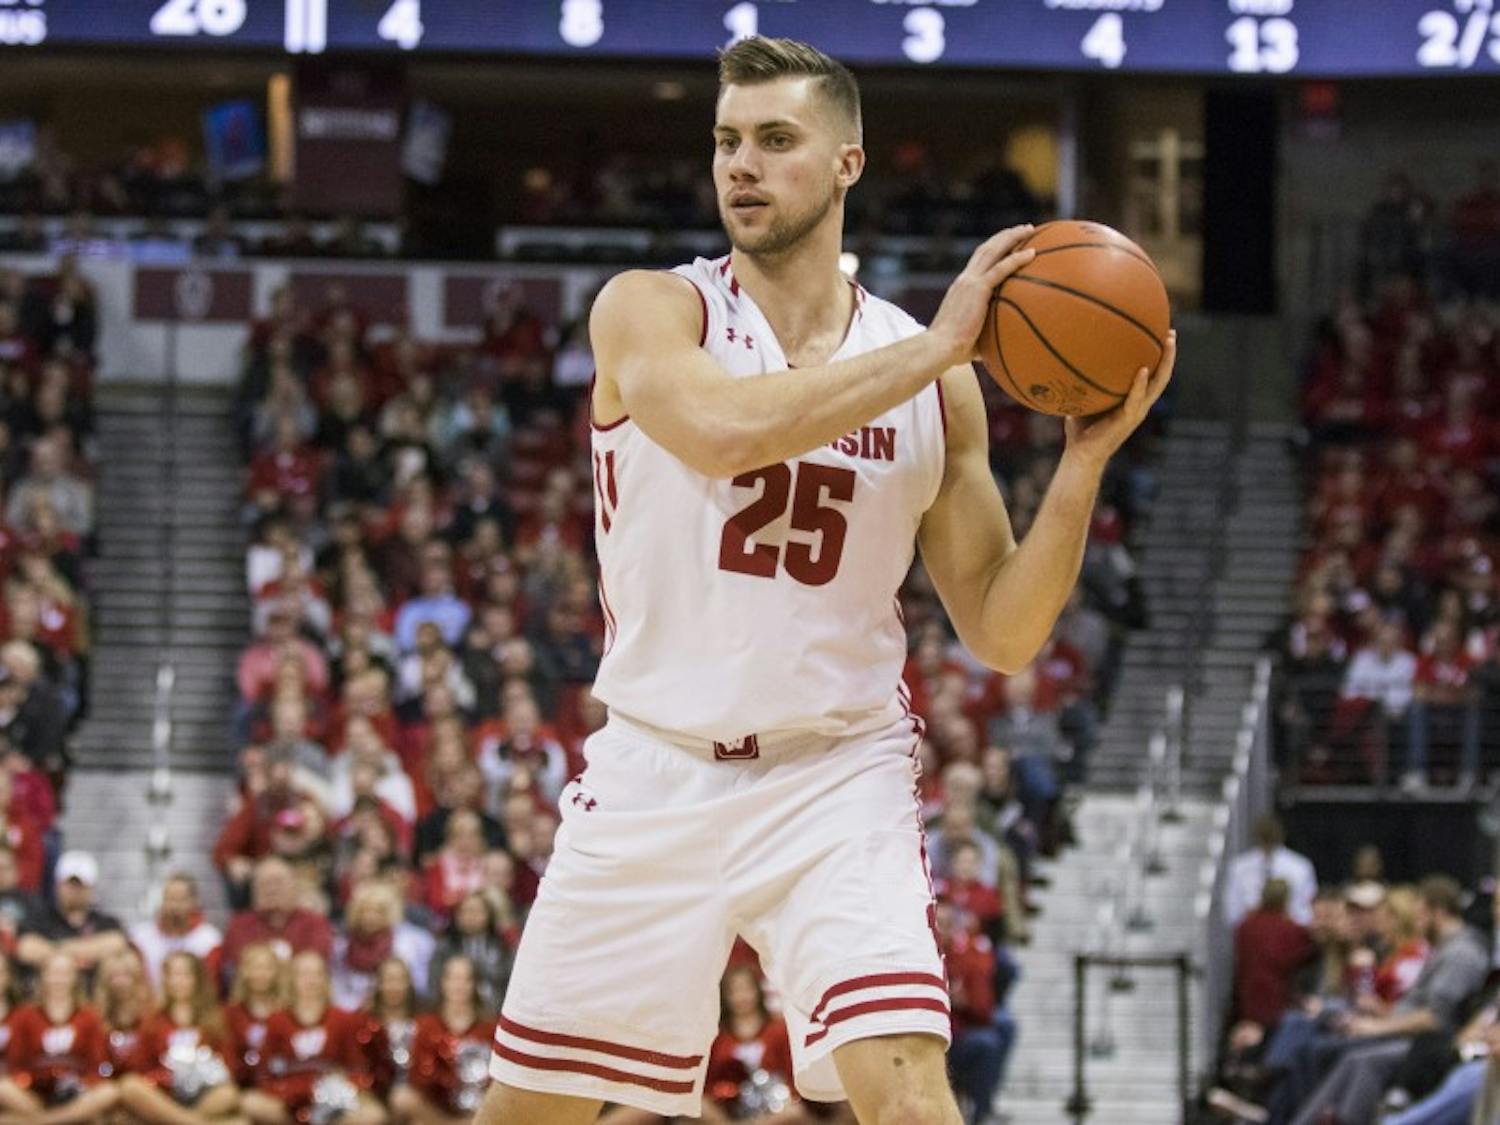 Forward Alex Illikainen announced his departure from the program Monday, leaving Wisconsin with just three healthy players 6'6" or taller.